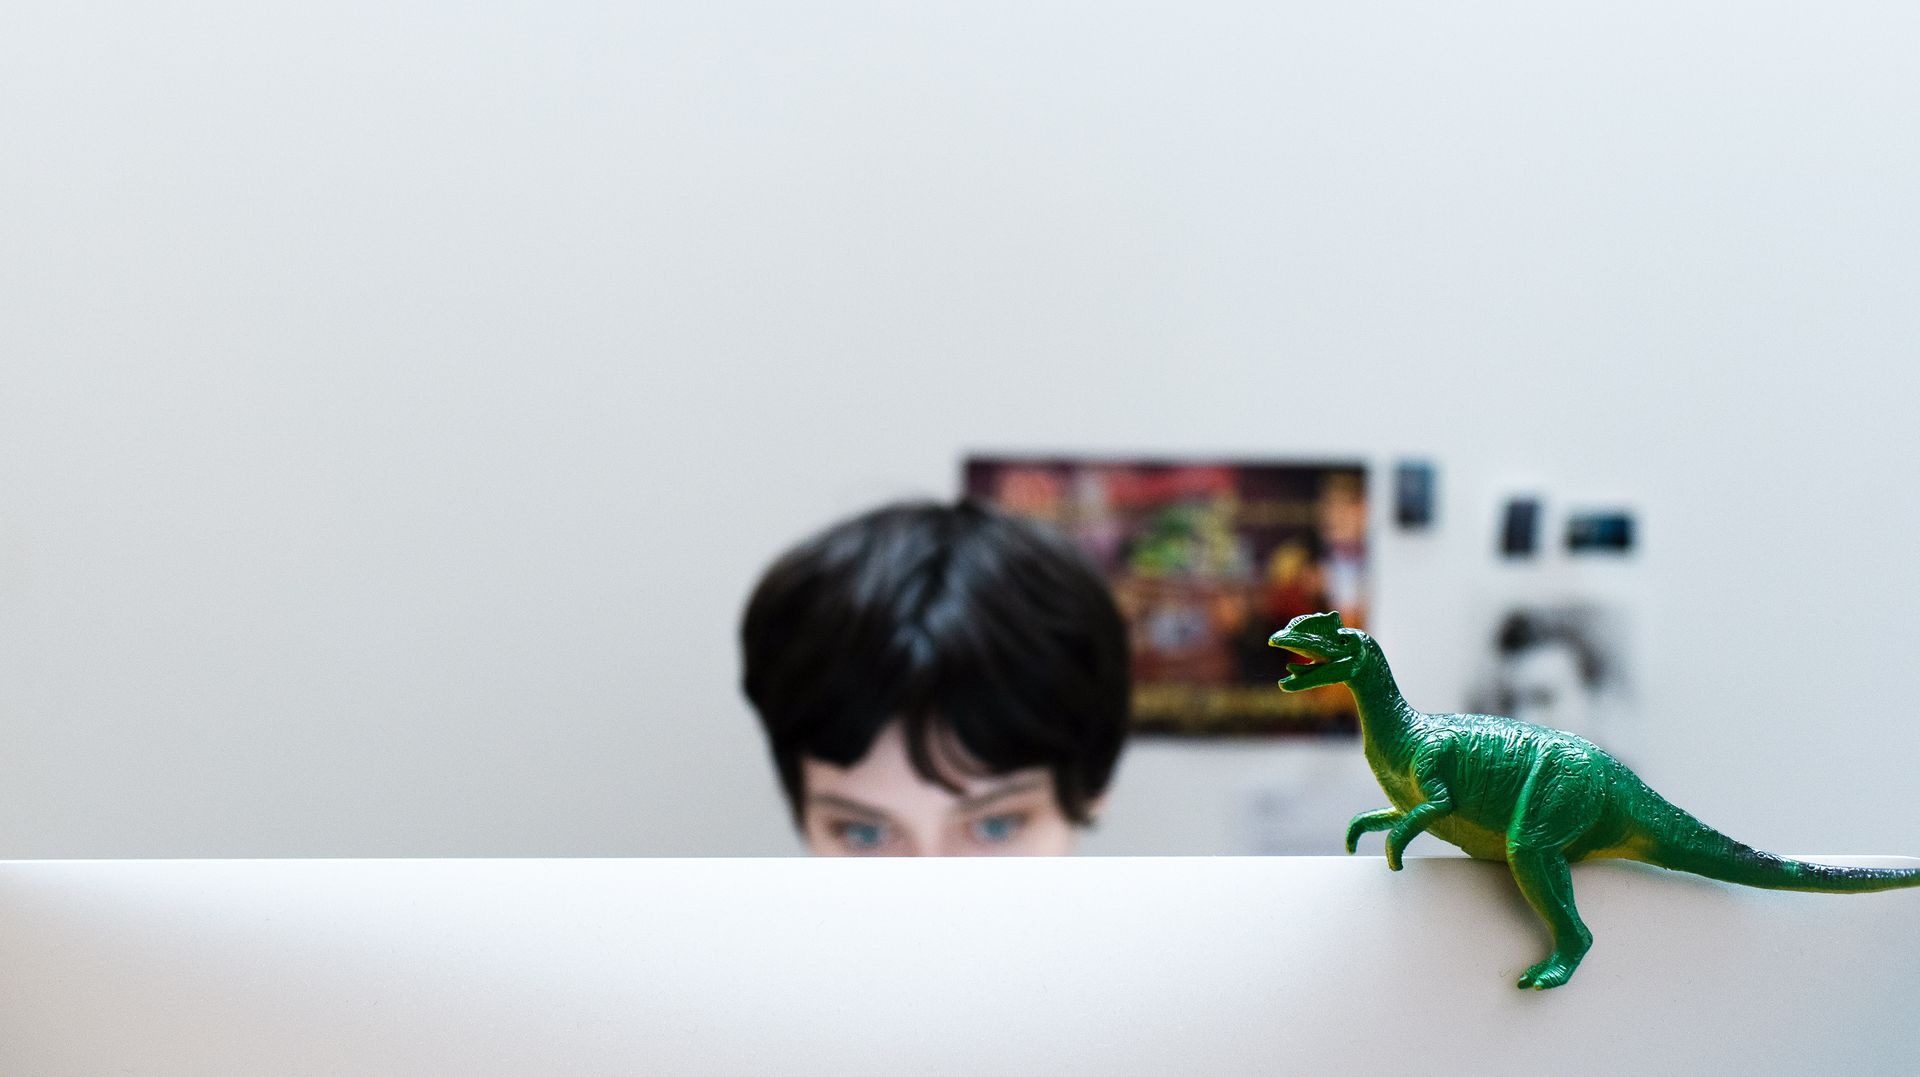 CB, our Creative Lead, sit behind her computer. A toy dinosaur is sitting atop the monitor